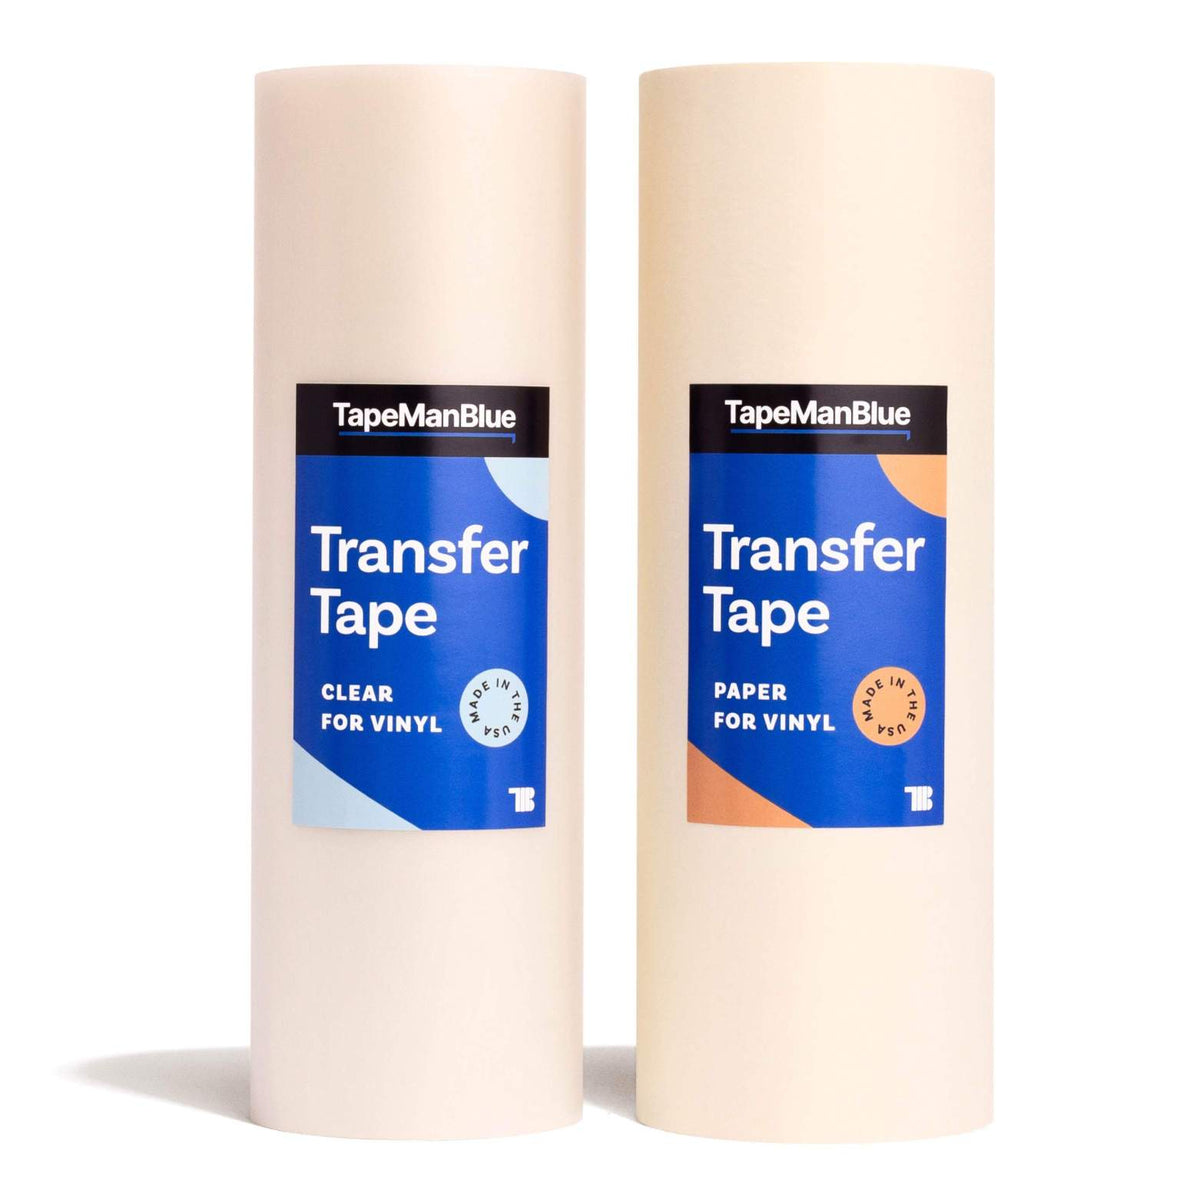 New Transfer Tape for Lightweight Mounting Applications